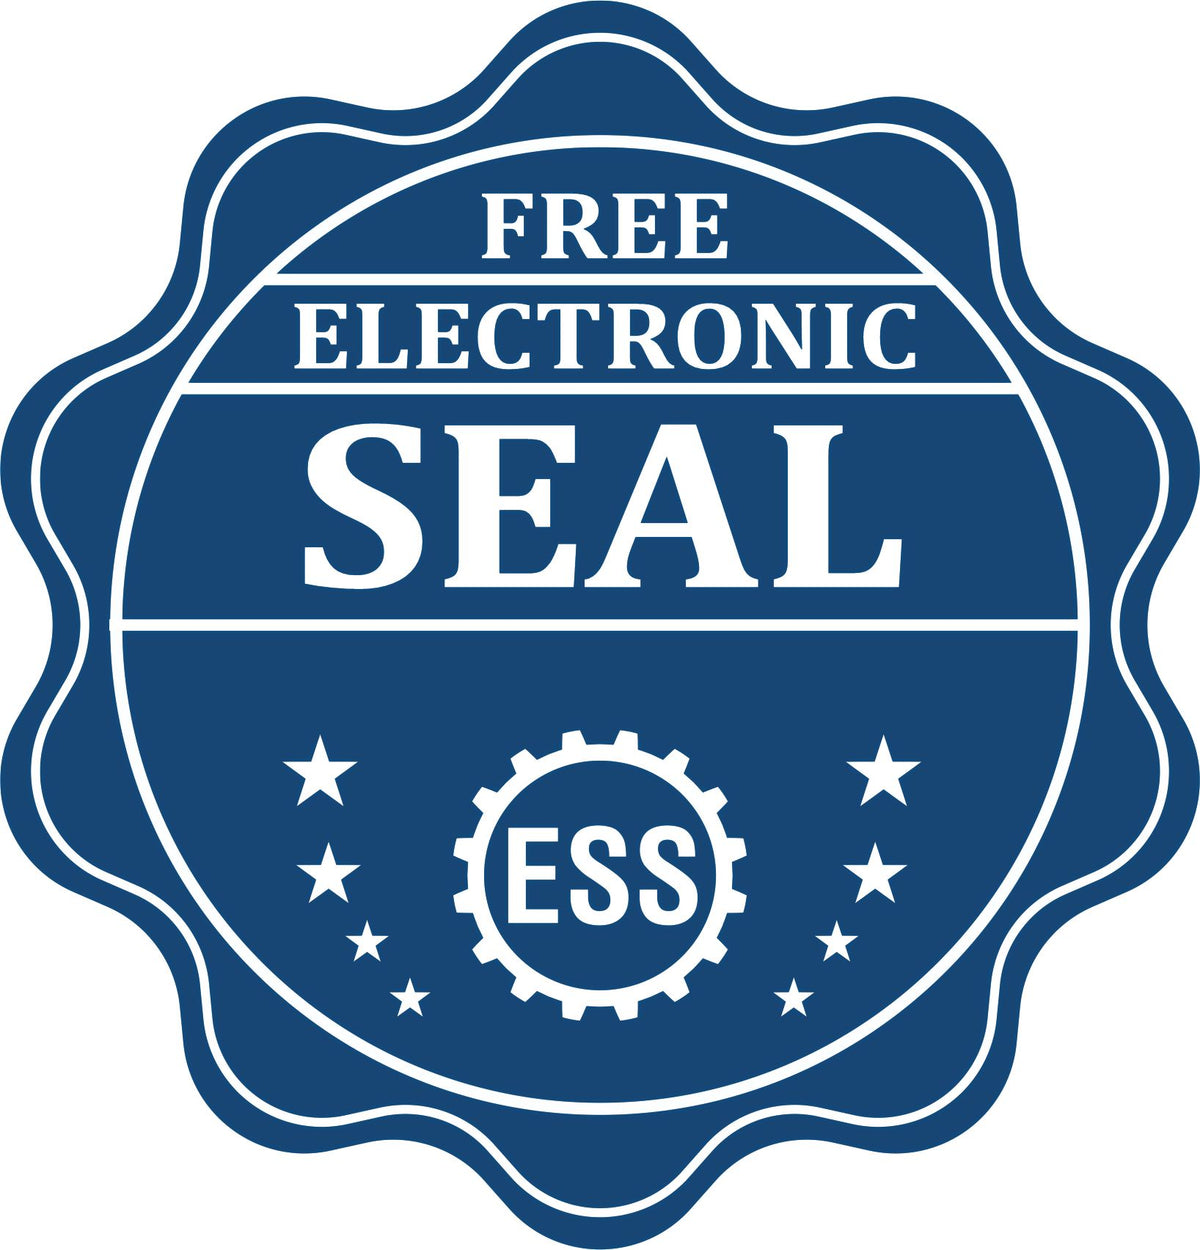 A badge showing a free electronic seal for the Slim Pre-Inked New Mexico Professional Engineer Seal Stamp with stars and the ESS gear on the emblem.